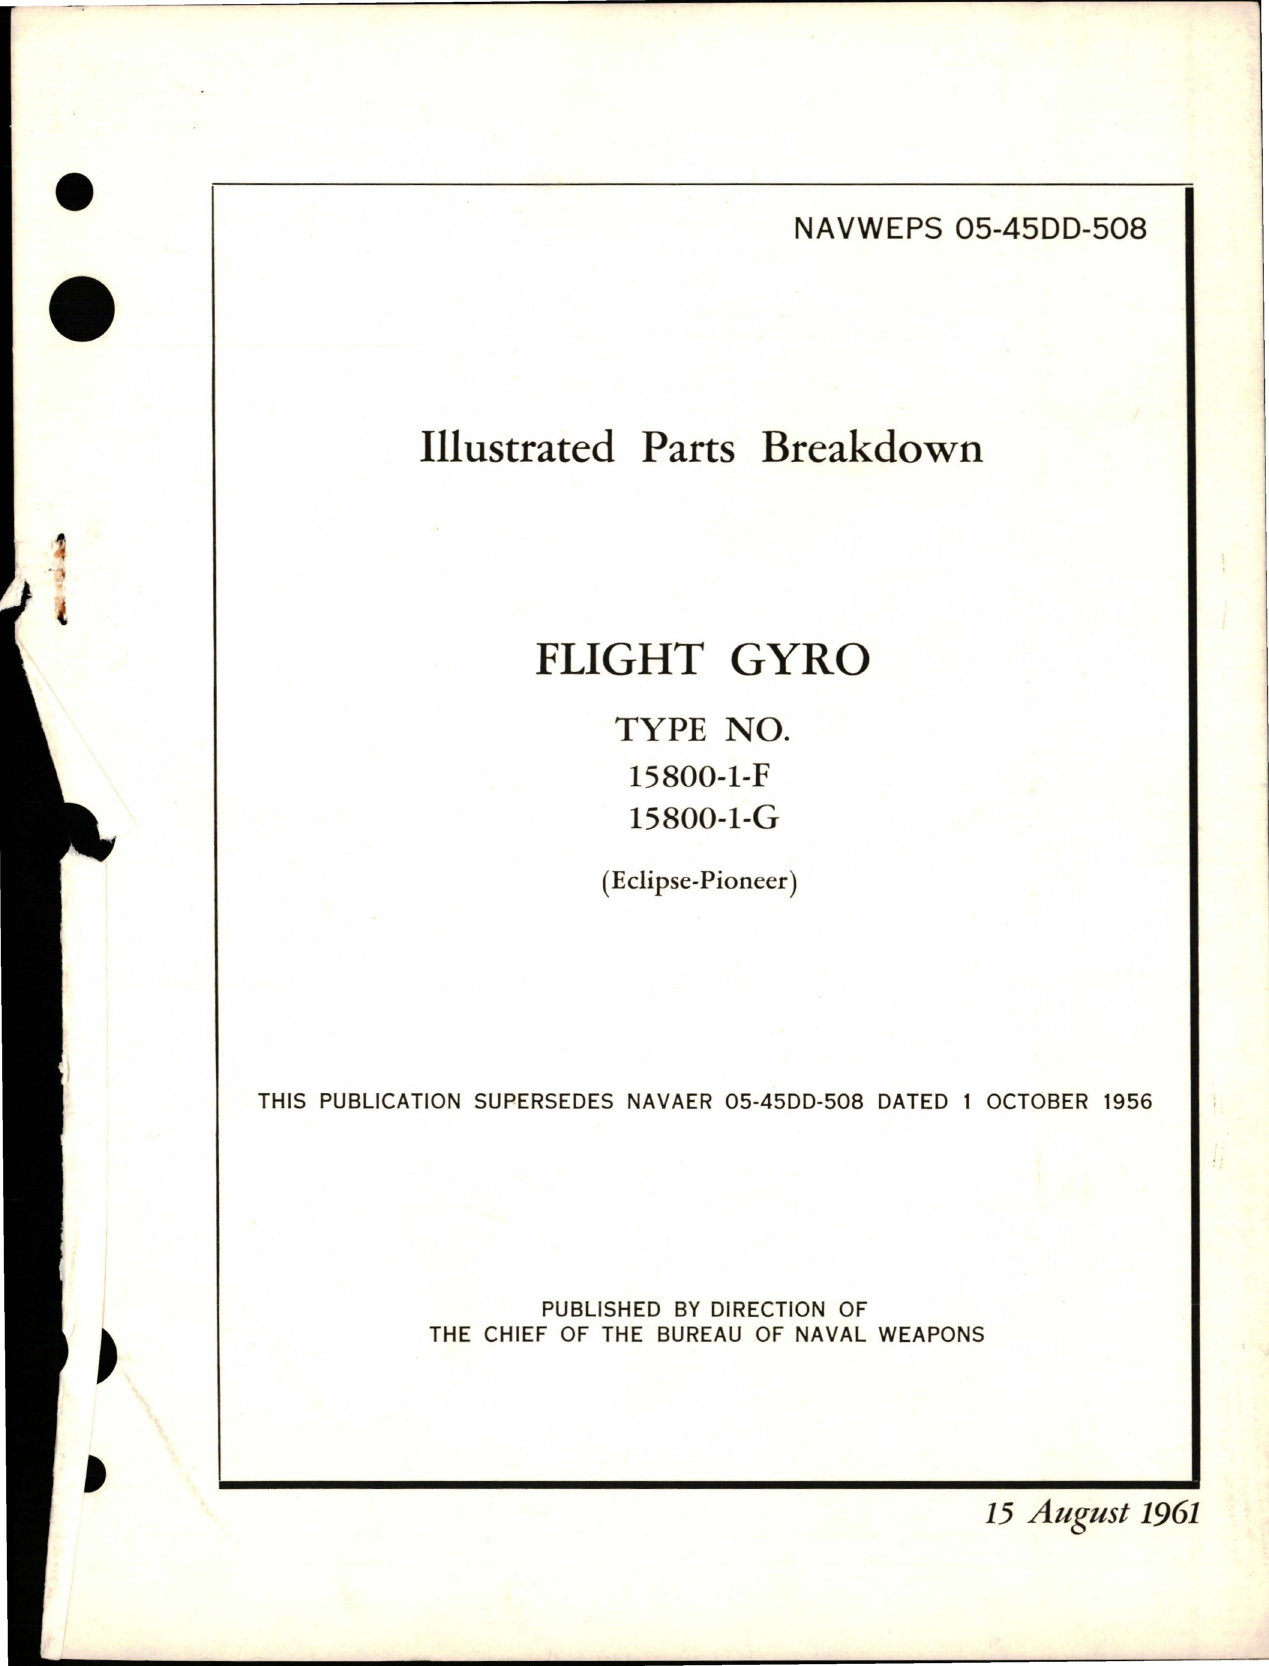 Sample page 1 from AirCorps Library document: Illustrated Parts Breakdown for Flight Gyro - Type 15800-1-F and 15800-1-G